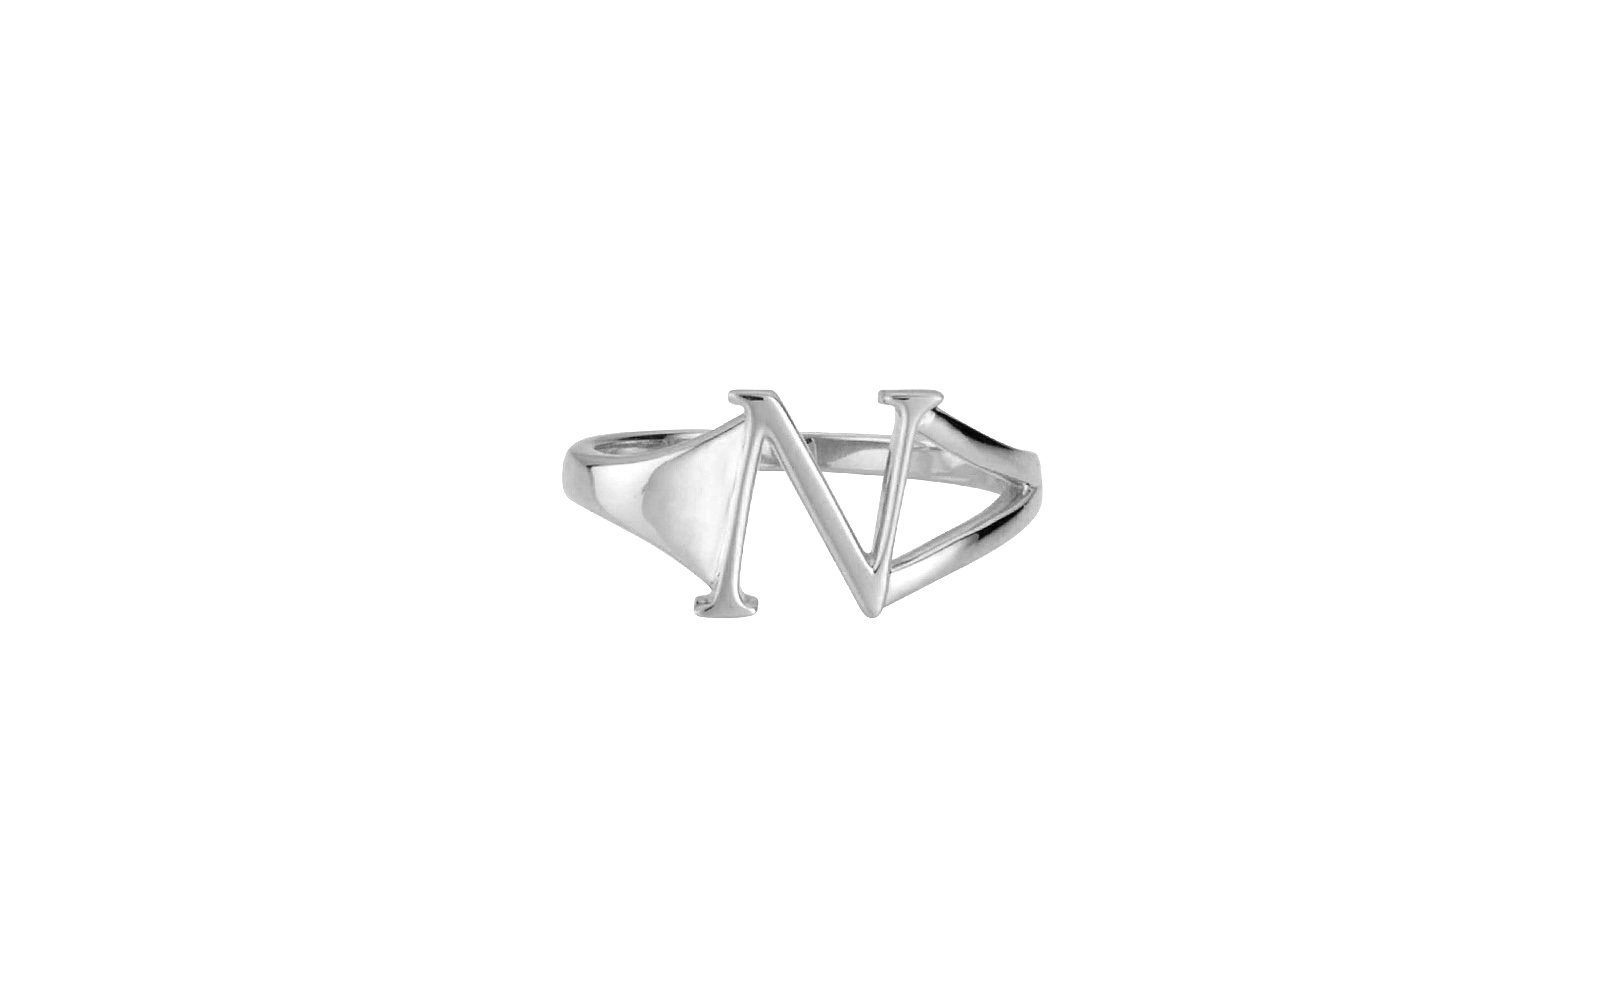 Initial Signet Ring Sterling Silver